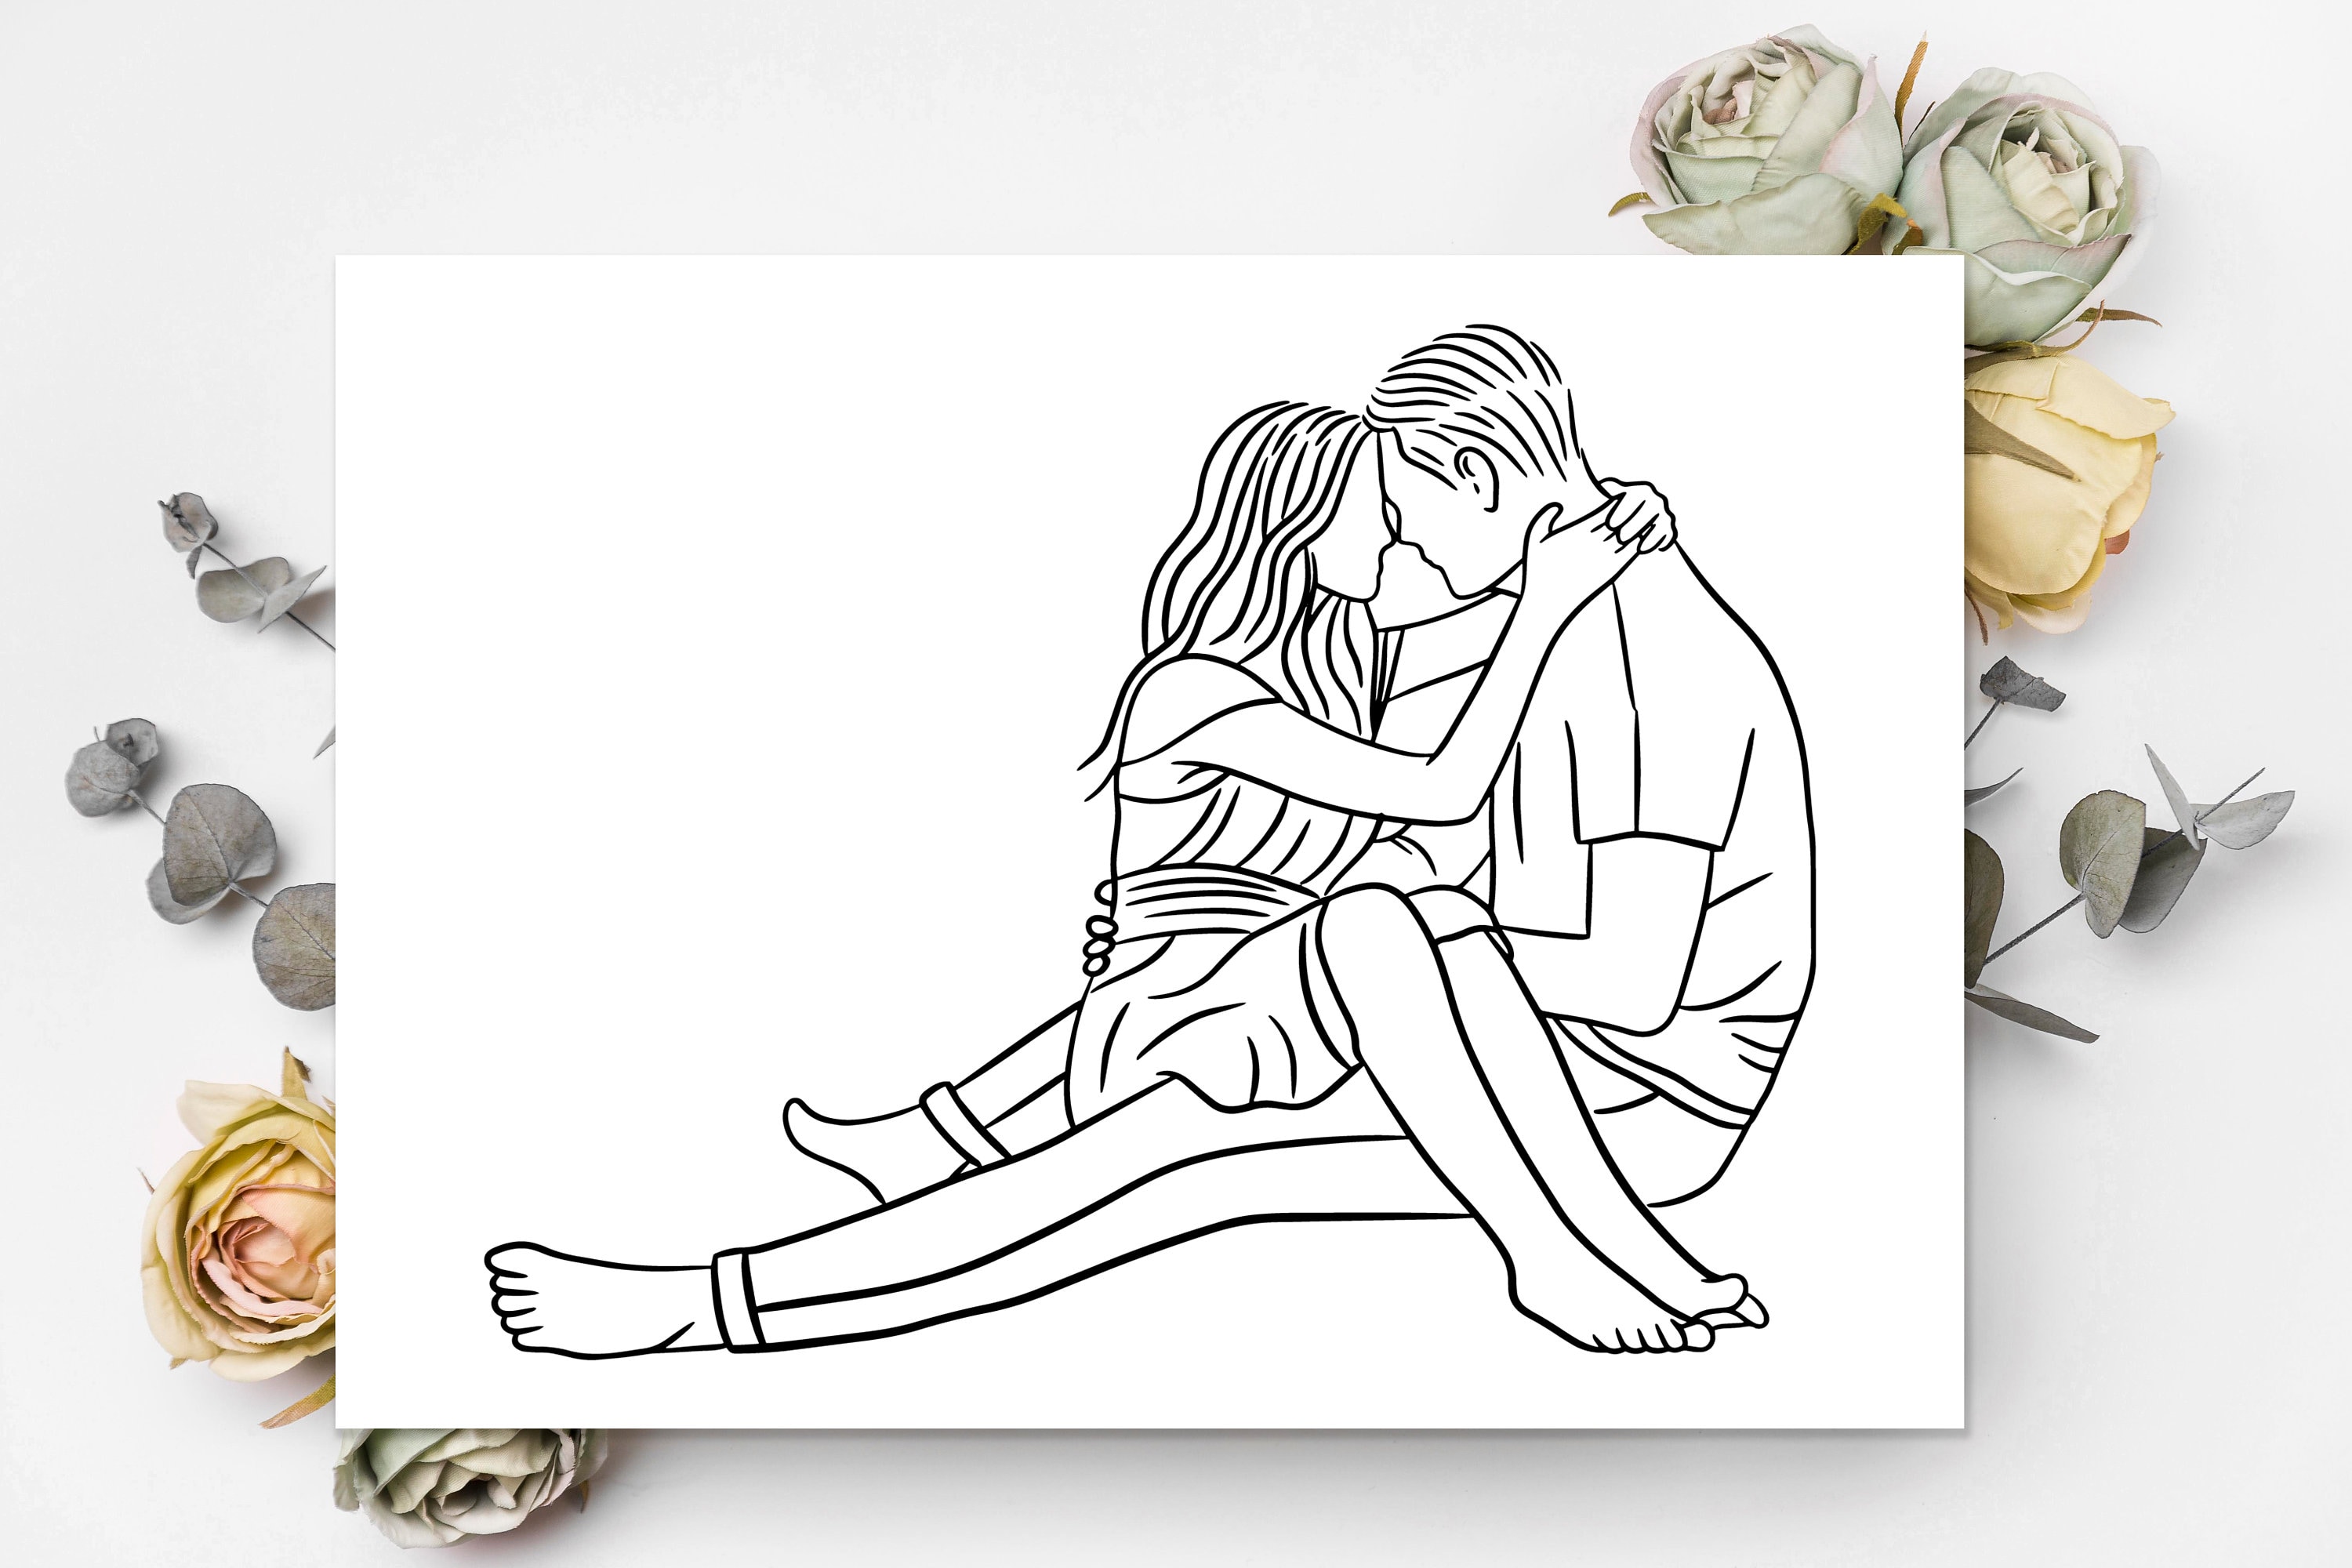 Couples in love coloring pages for adolescents or adults alike deluxe set unique designs print at home high quality prints instant download